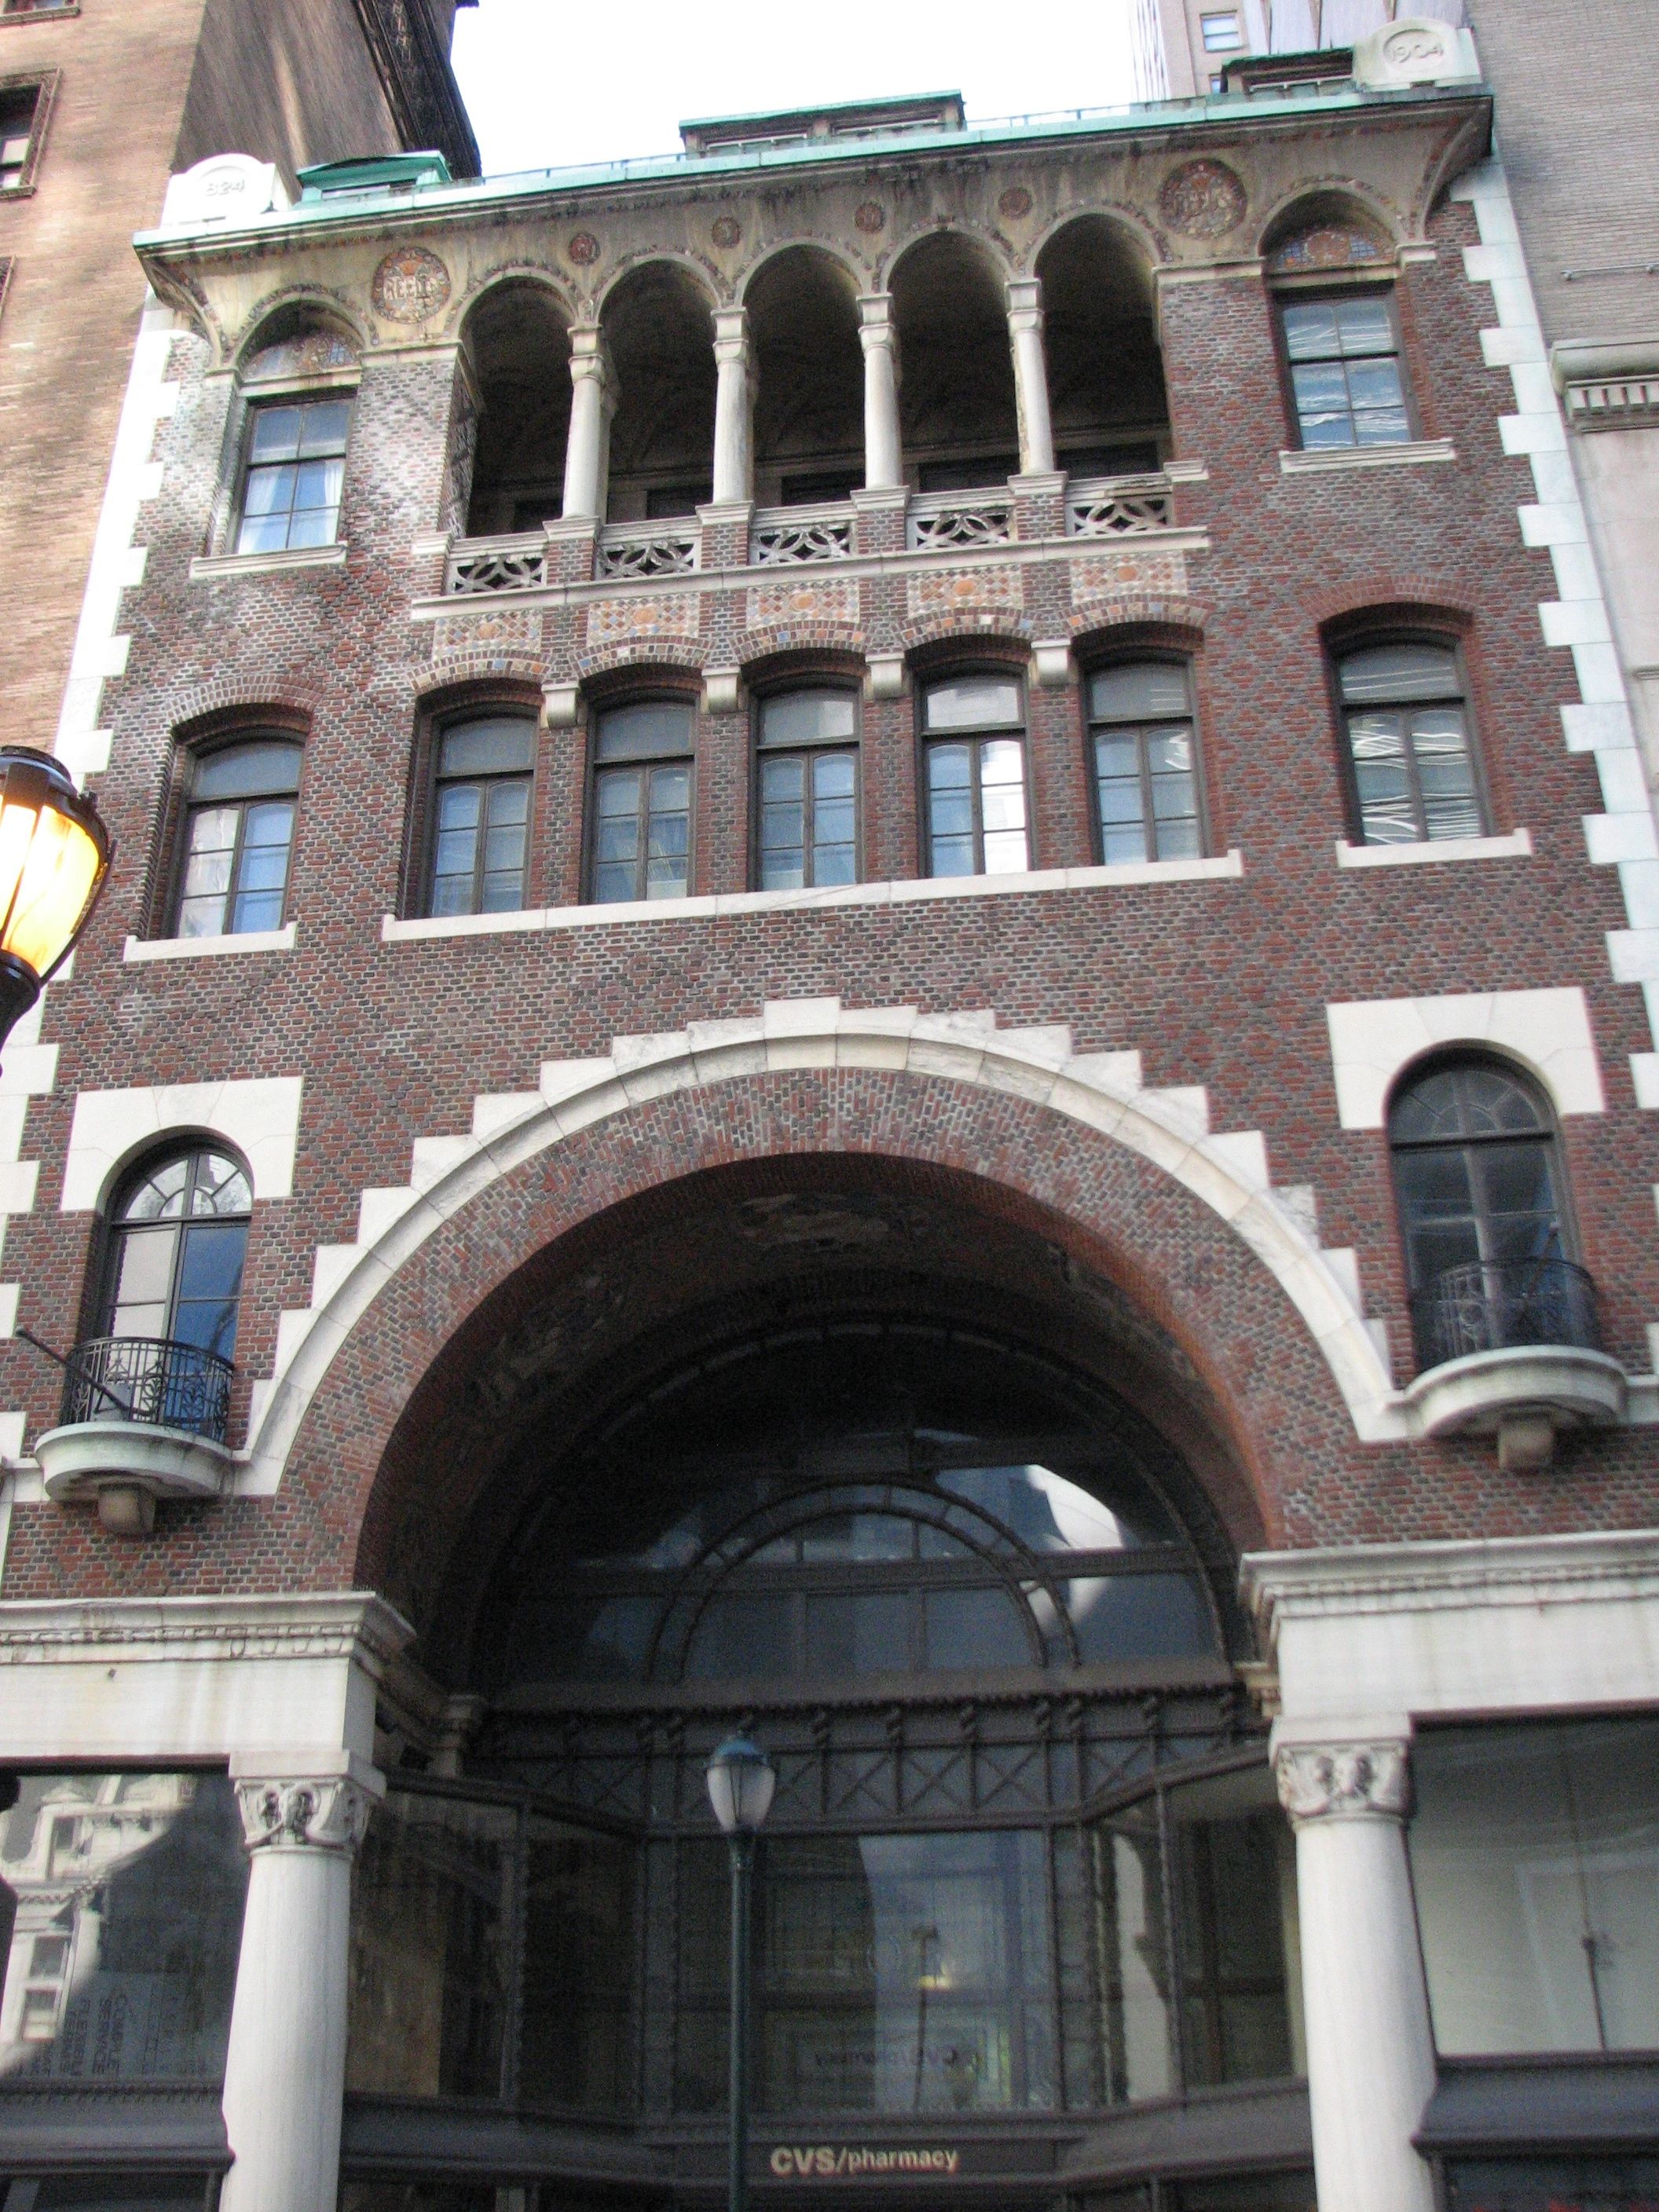 The Jacob Reed's Sons Building is a retail landmark on Chestnut Street.